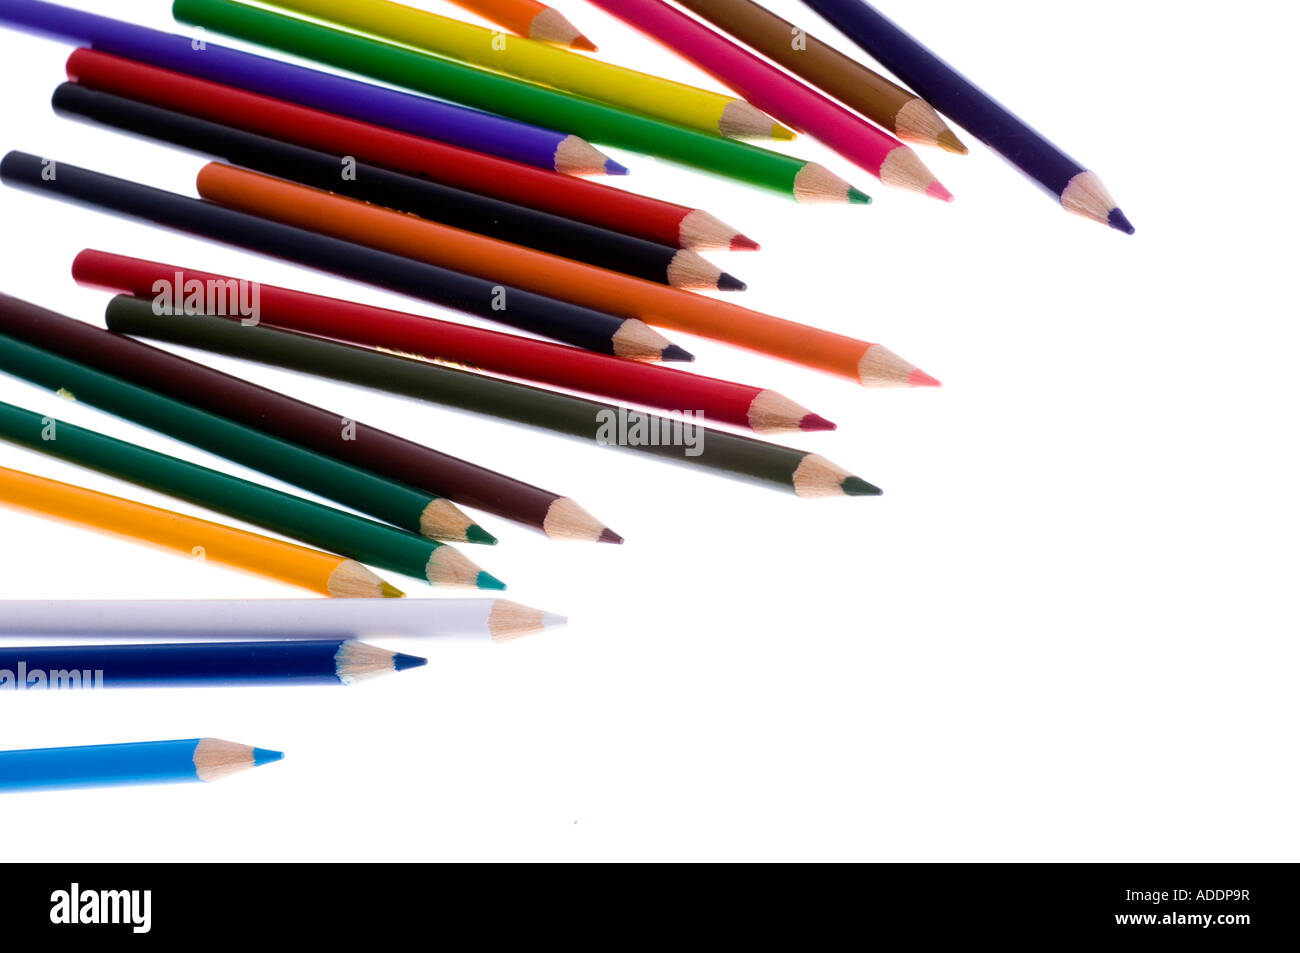 Coloring pencils spread on white background Stock Photo - Alamy